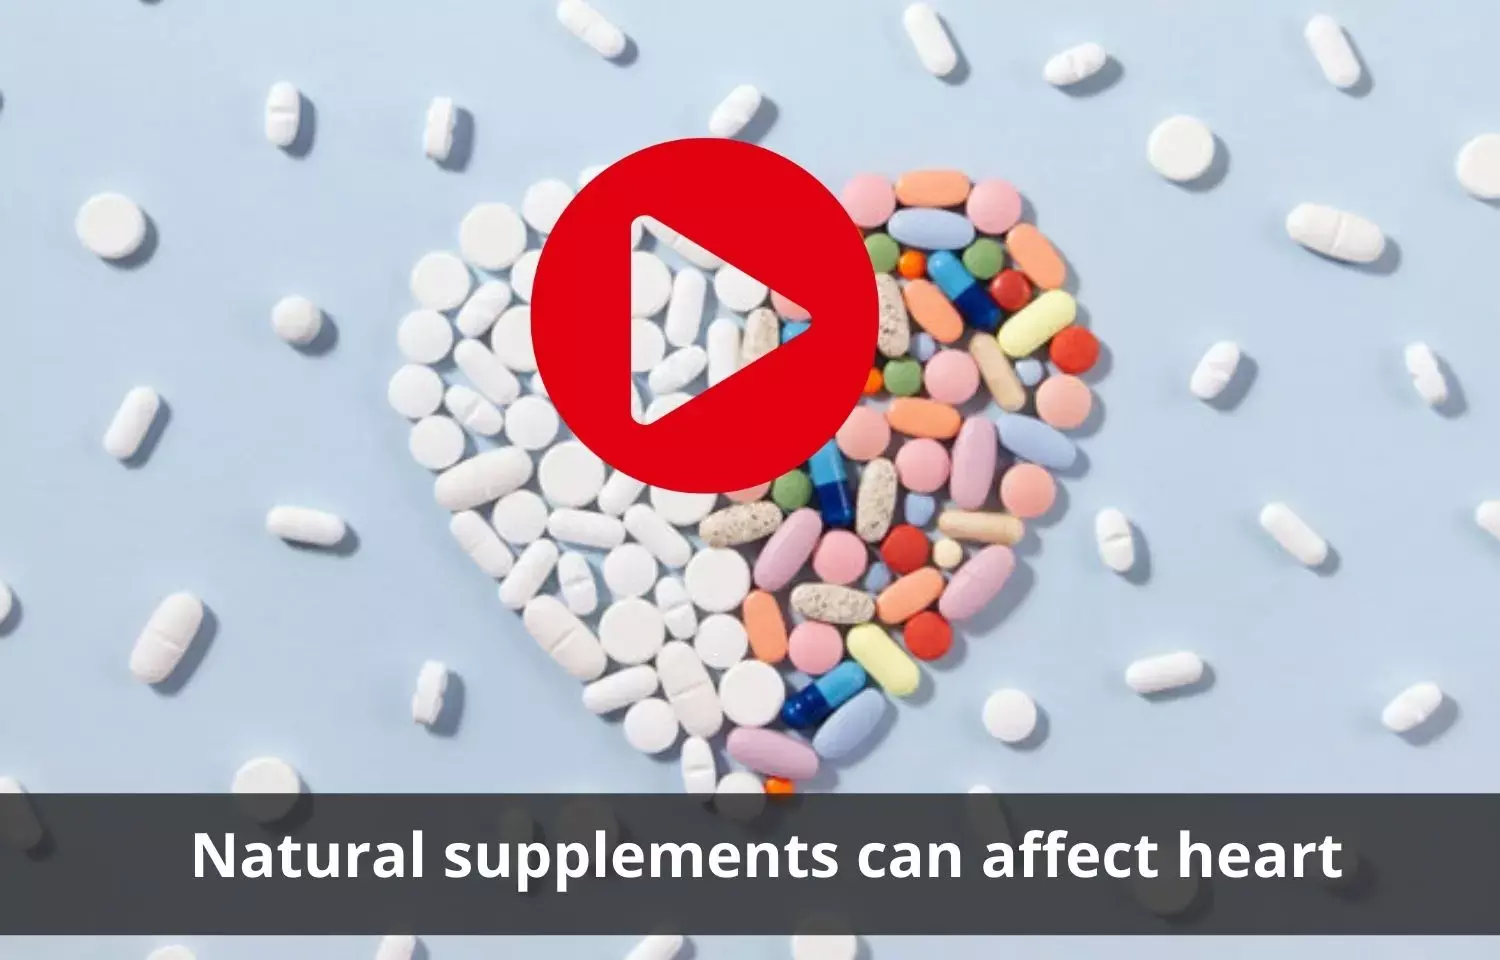 Nutritional supplements to have adverse effects on heart